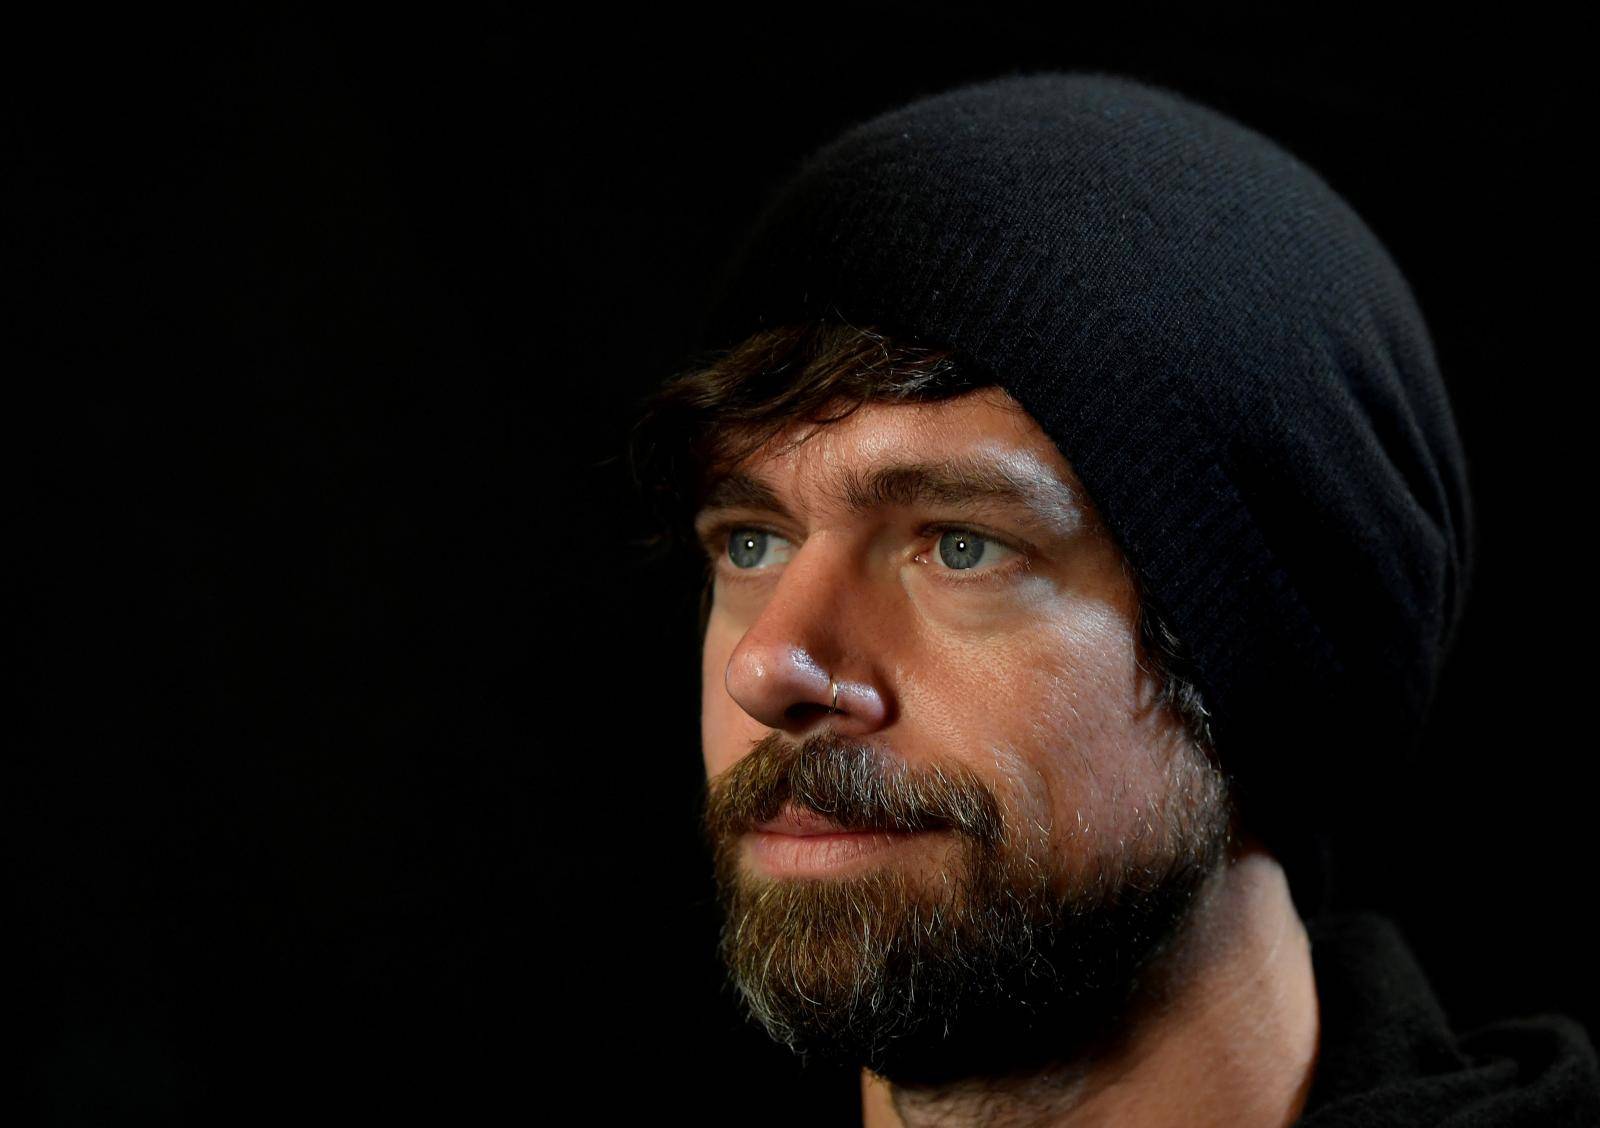 FILE PHOTO: Dorsey, co-founder of Twitter and fin-tech firm Square, sits for a portrait during an interview with Reuters in London